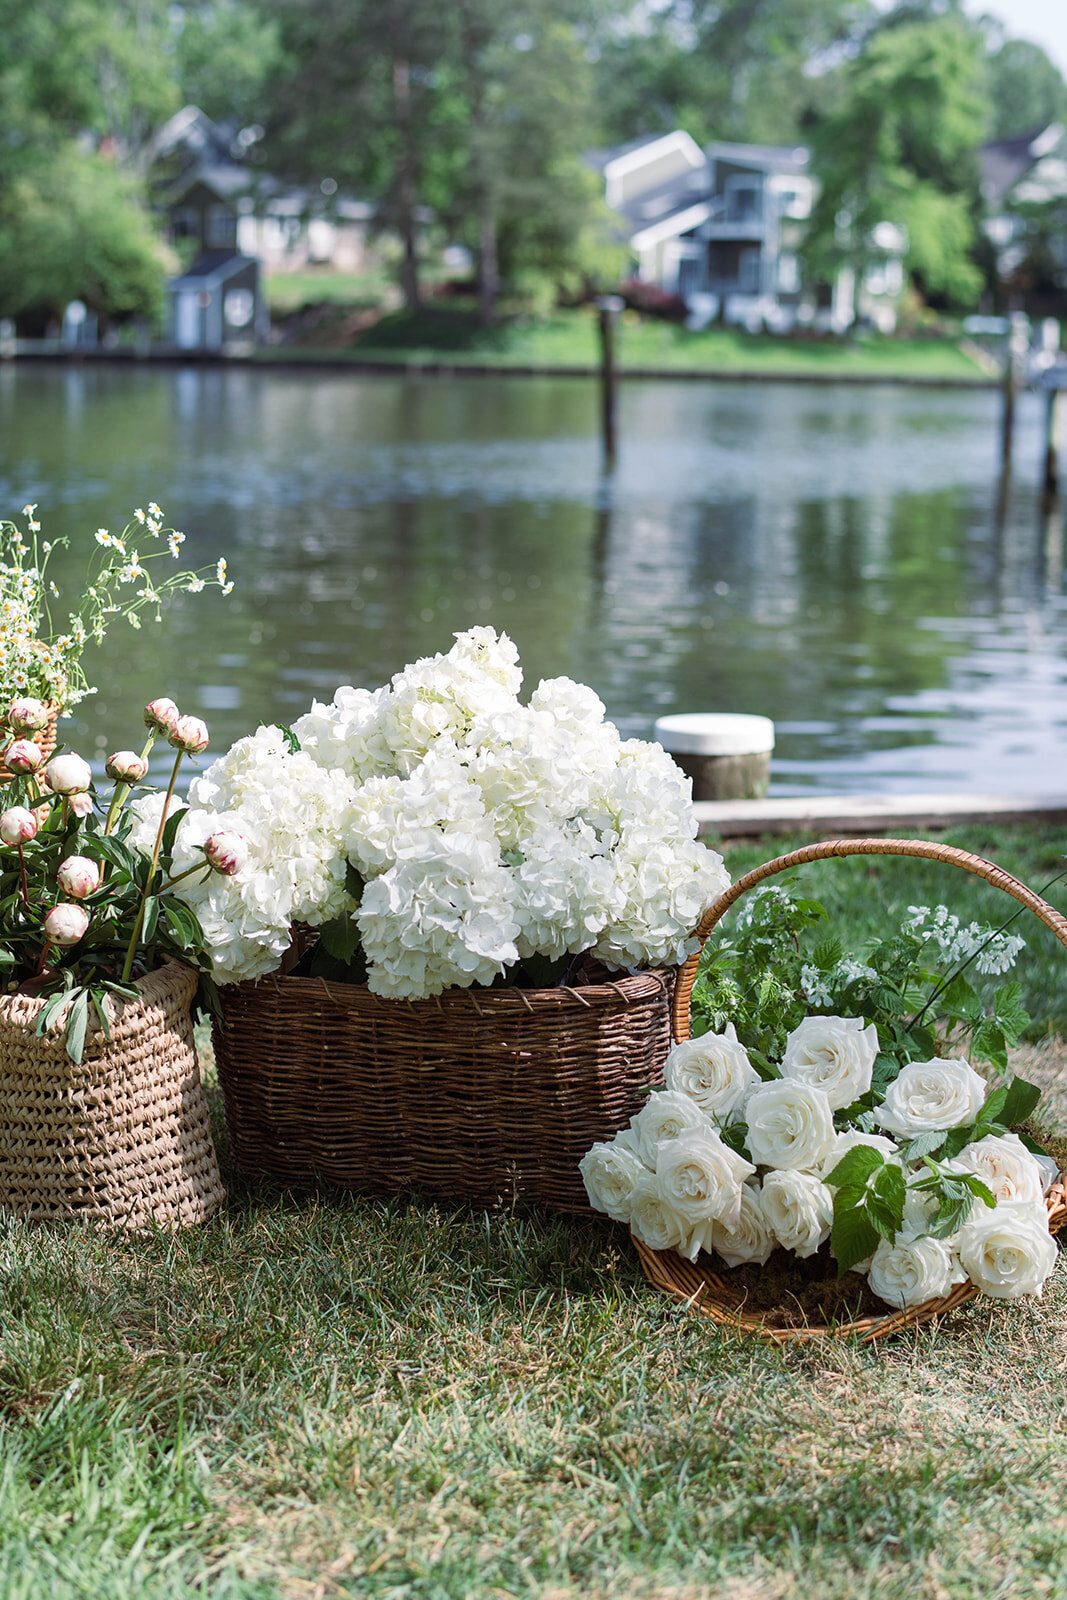 Wicker baskets filled with white garden roses, white hydrangeas, daisies, and blush peonies with scenic waterfront in the background.